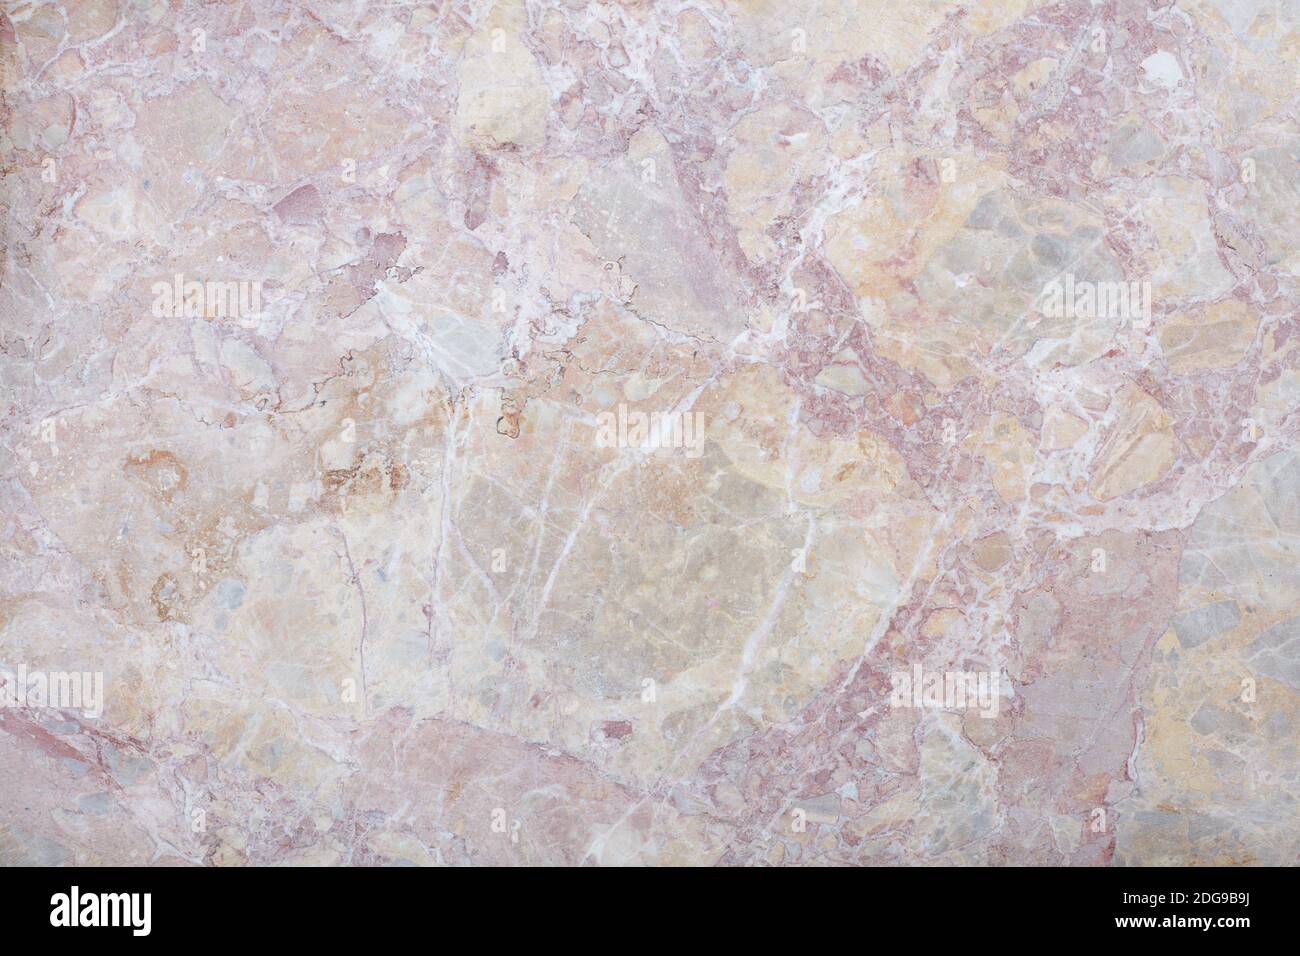 Variegated rough stone with grey, pink, and beige colors texture background Stock Photo